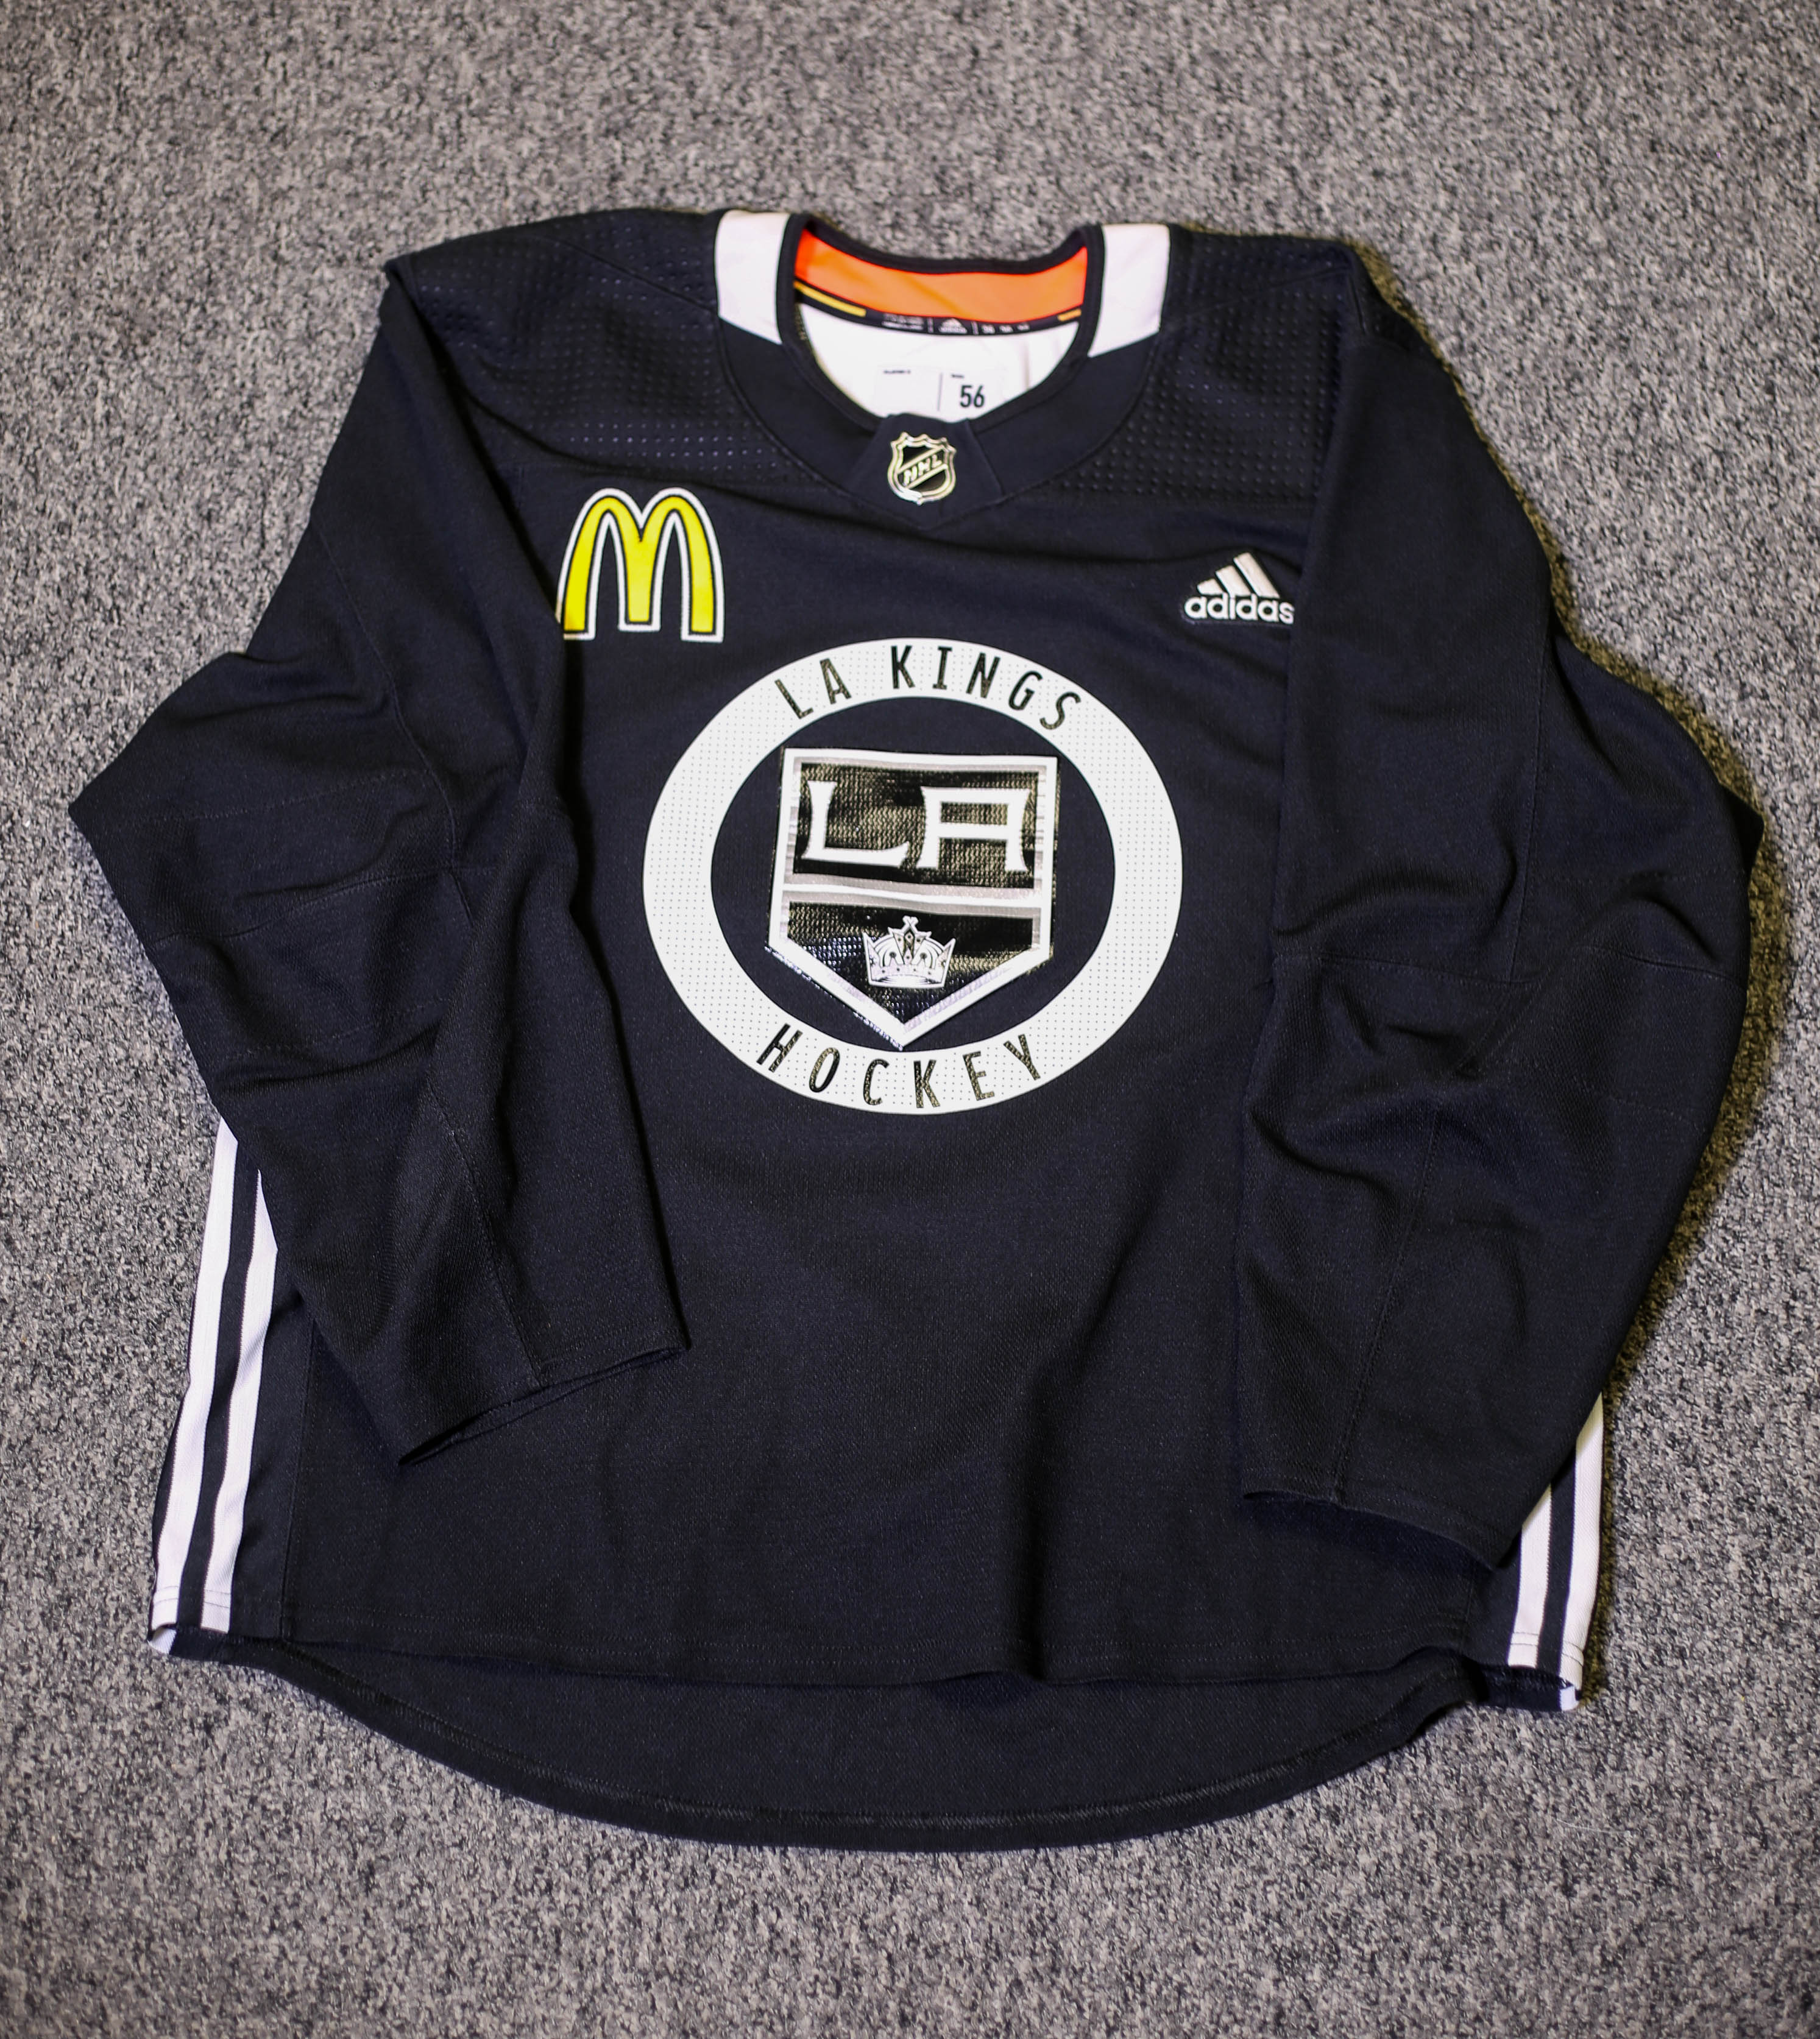 Los Angeles Kings Jerseys  New, Preowned, and Vintage